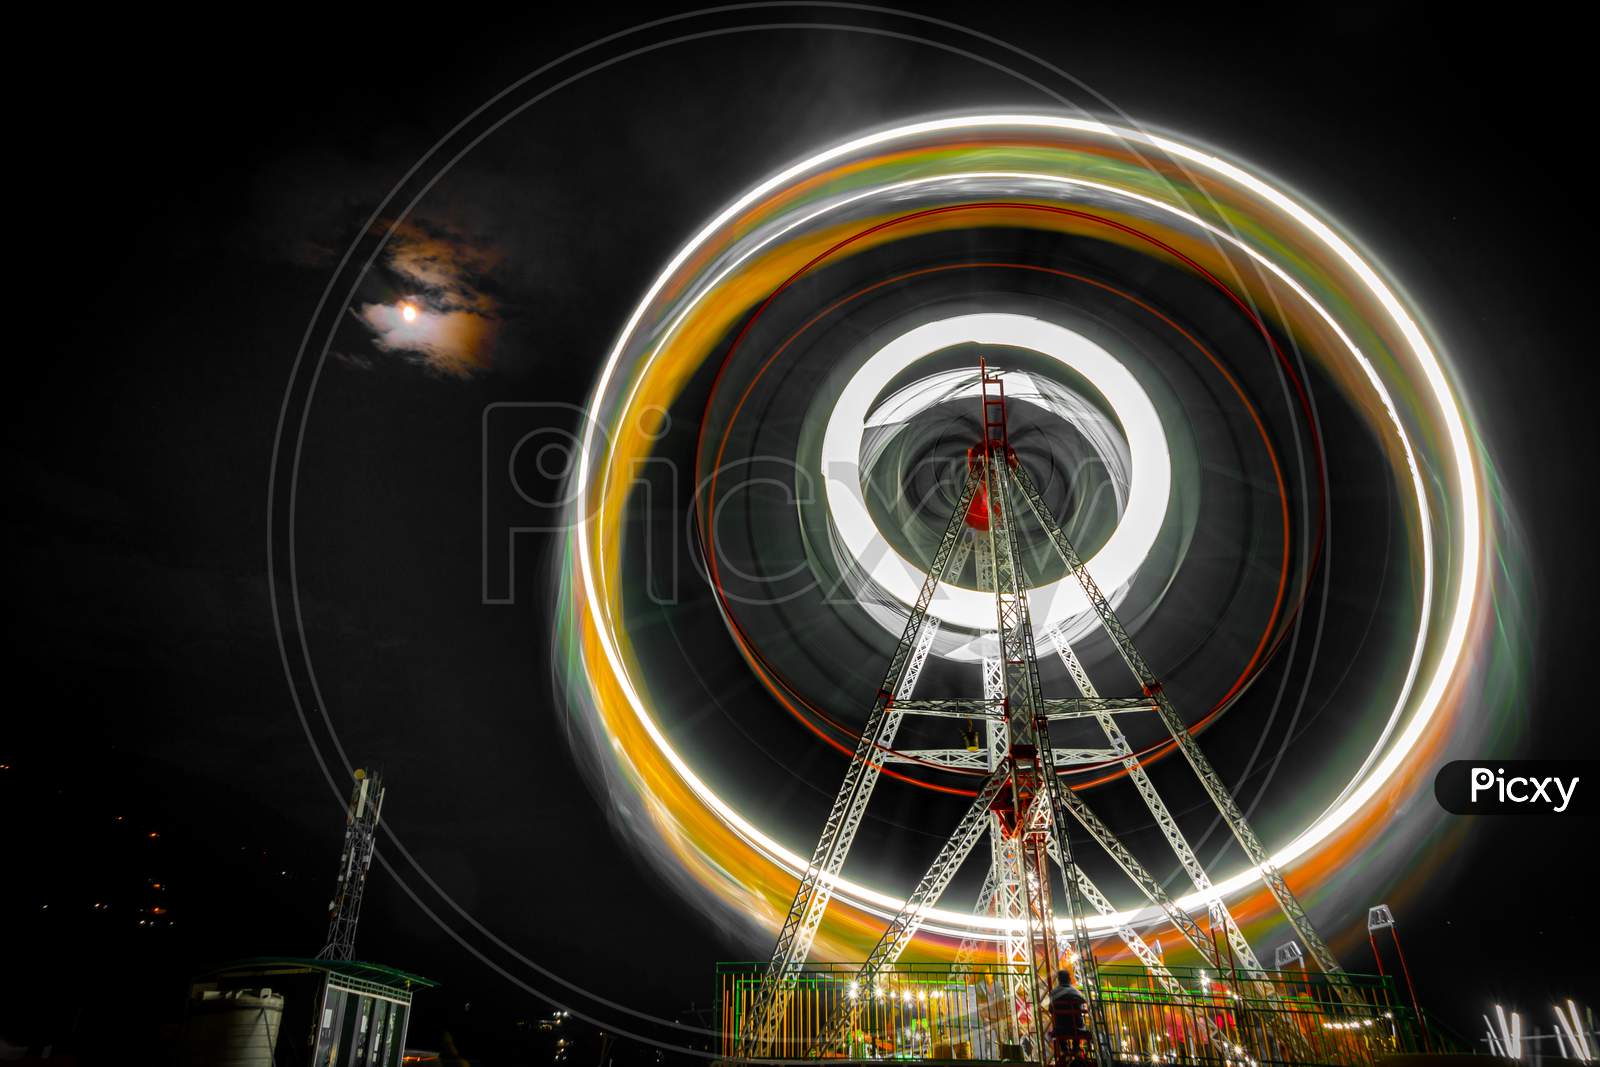 Long Exposure Of Giant Wheel in a Fair With Neon Lights